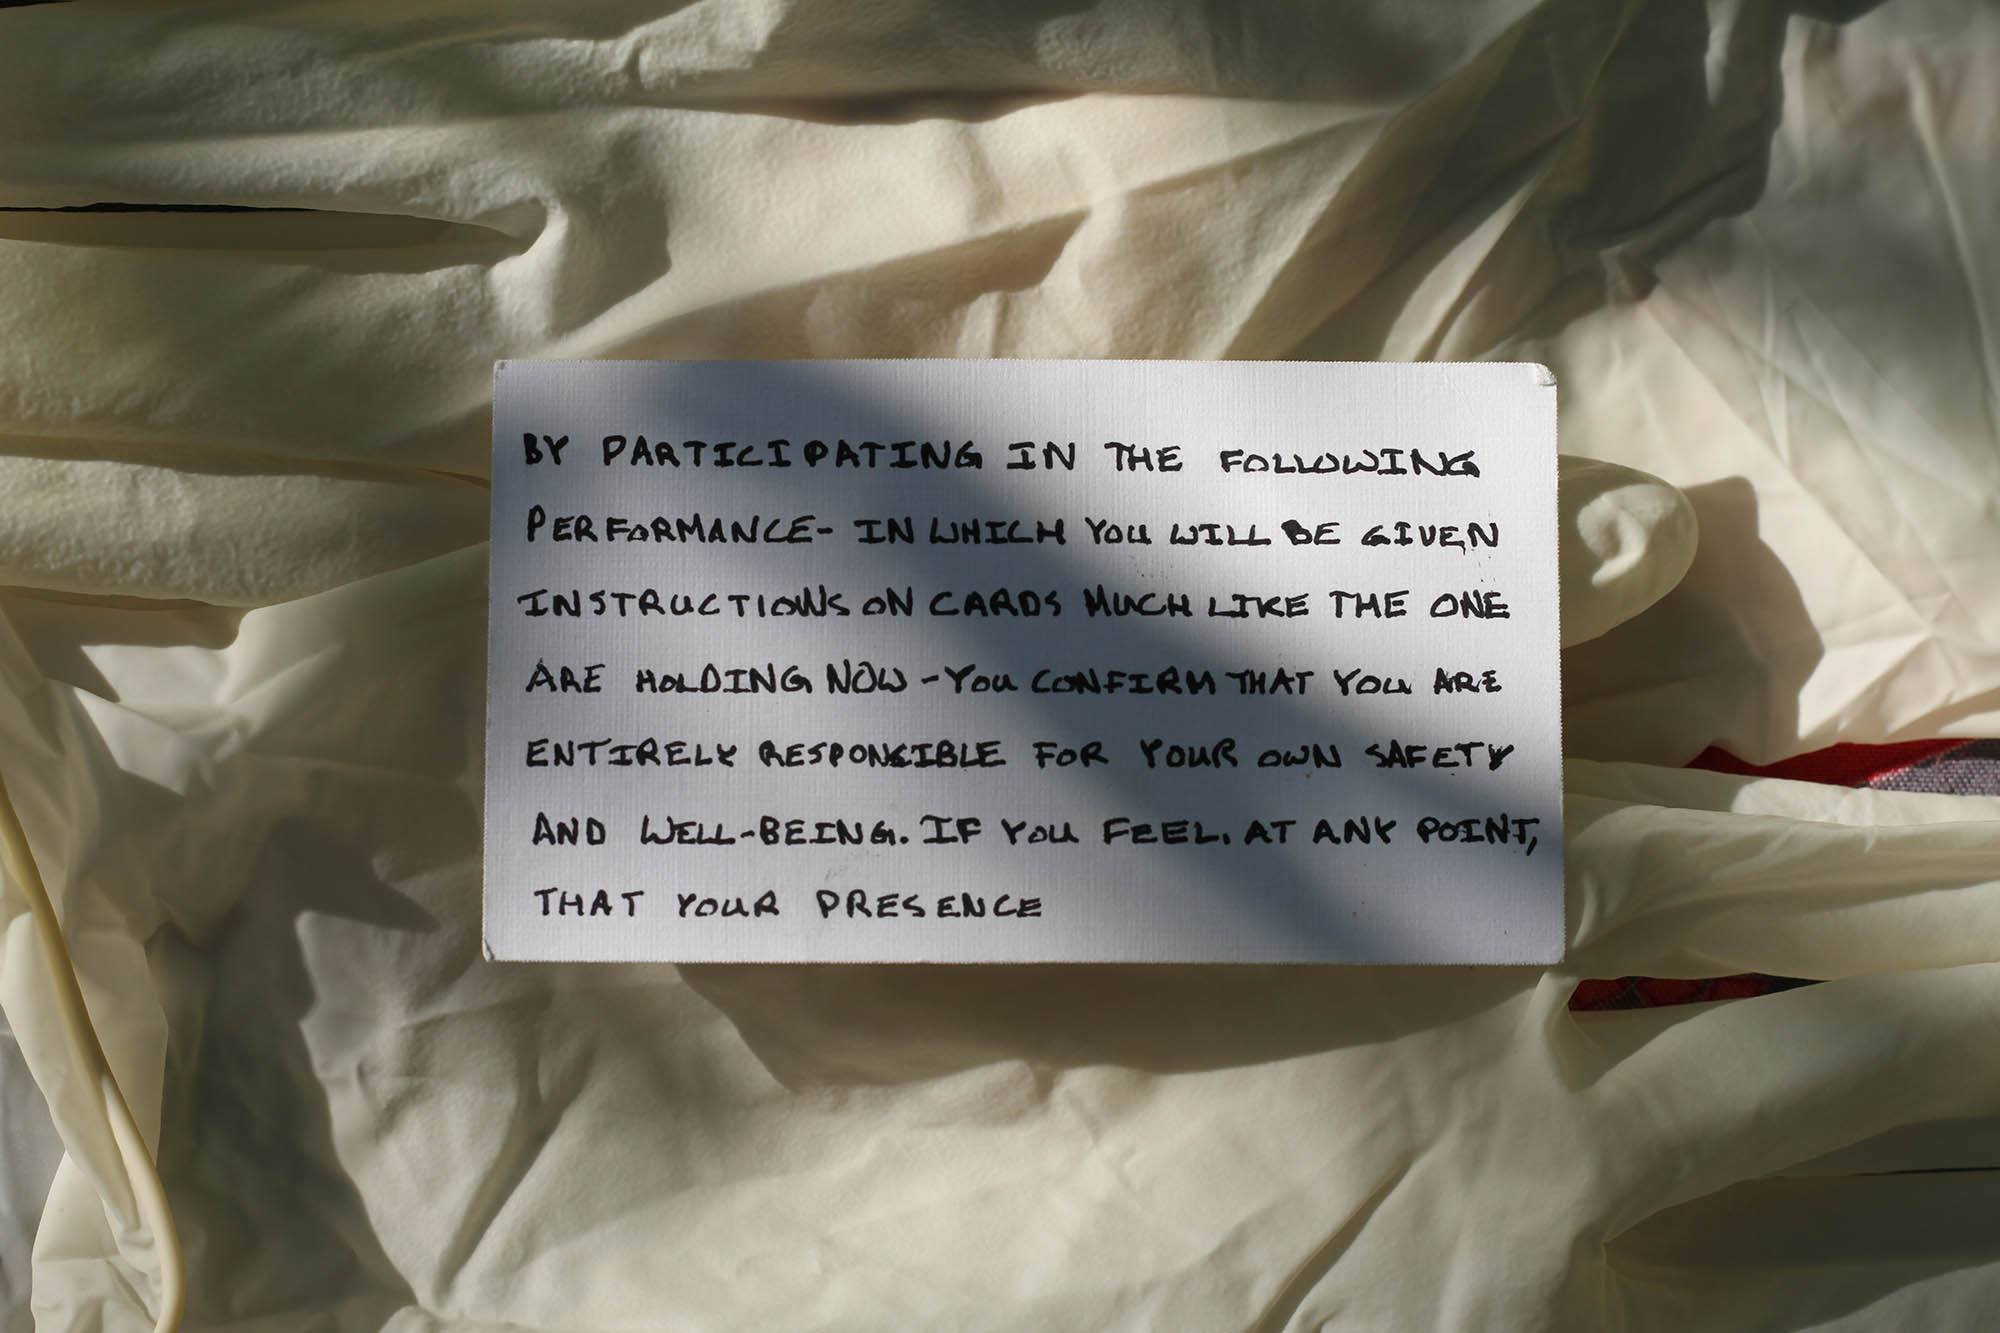 A notecard that reads "by participating in the following performance - in which you will be given instructions on cards much like the one you holding now - you confirm that you are entirely responsible for your own safety and well-bring. If you fell, at any point, that your presence"